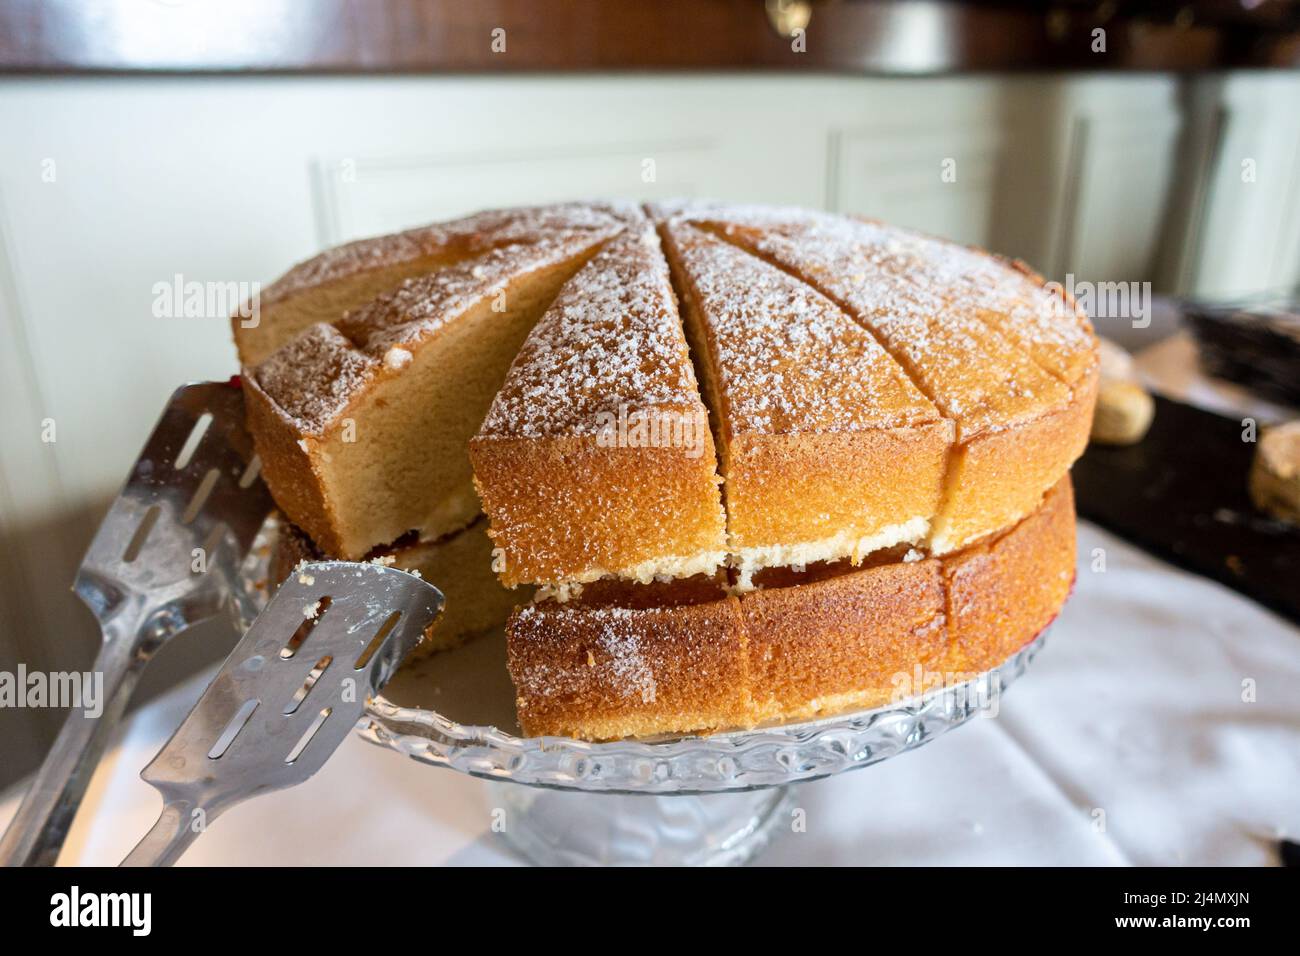 A Victoria sponge cake filled with butter icing and jam has been cut into slices ready for serving. Stock Photo